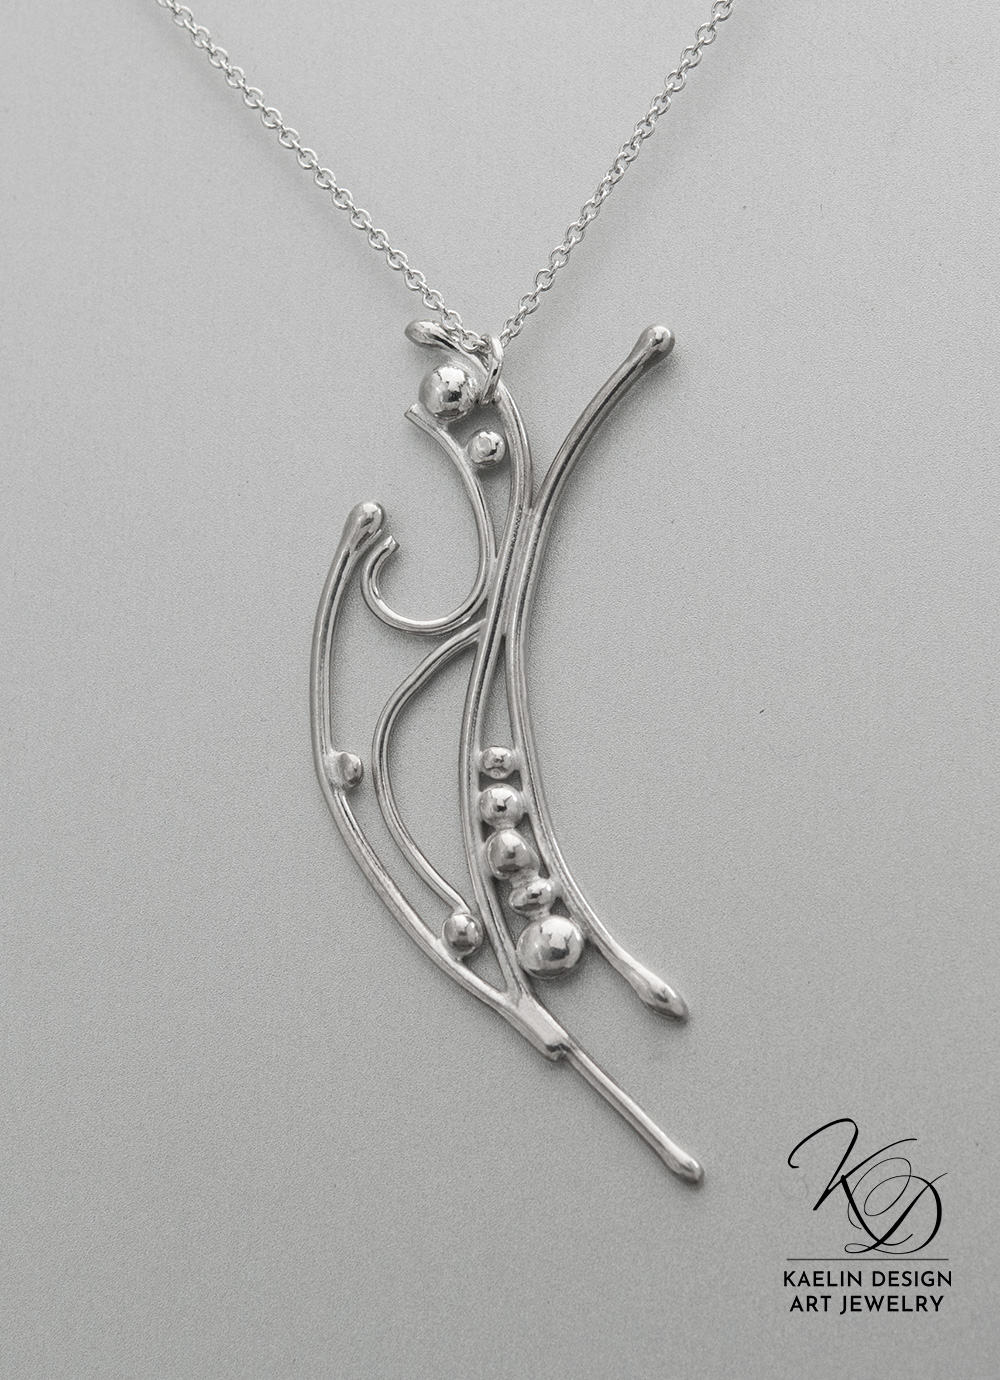 Ocean Froth Hand Forged Silver Art Jewelry Pendant by Kaelin Design